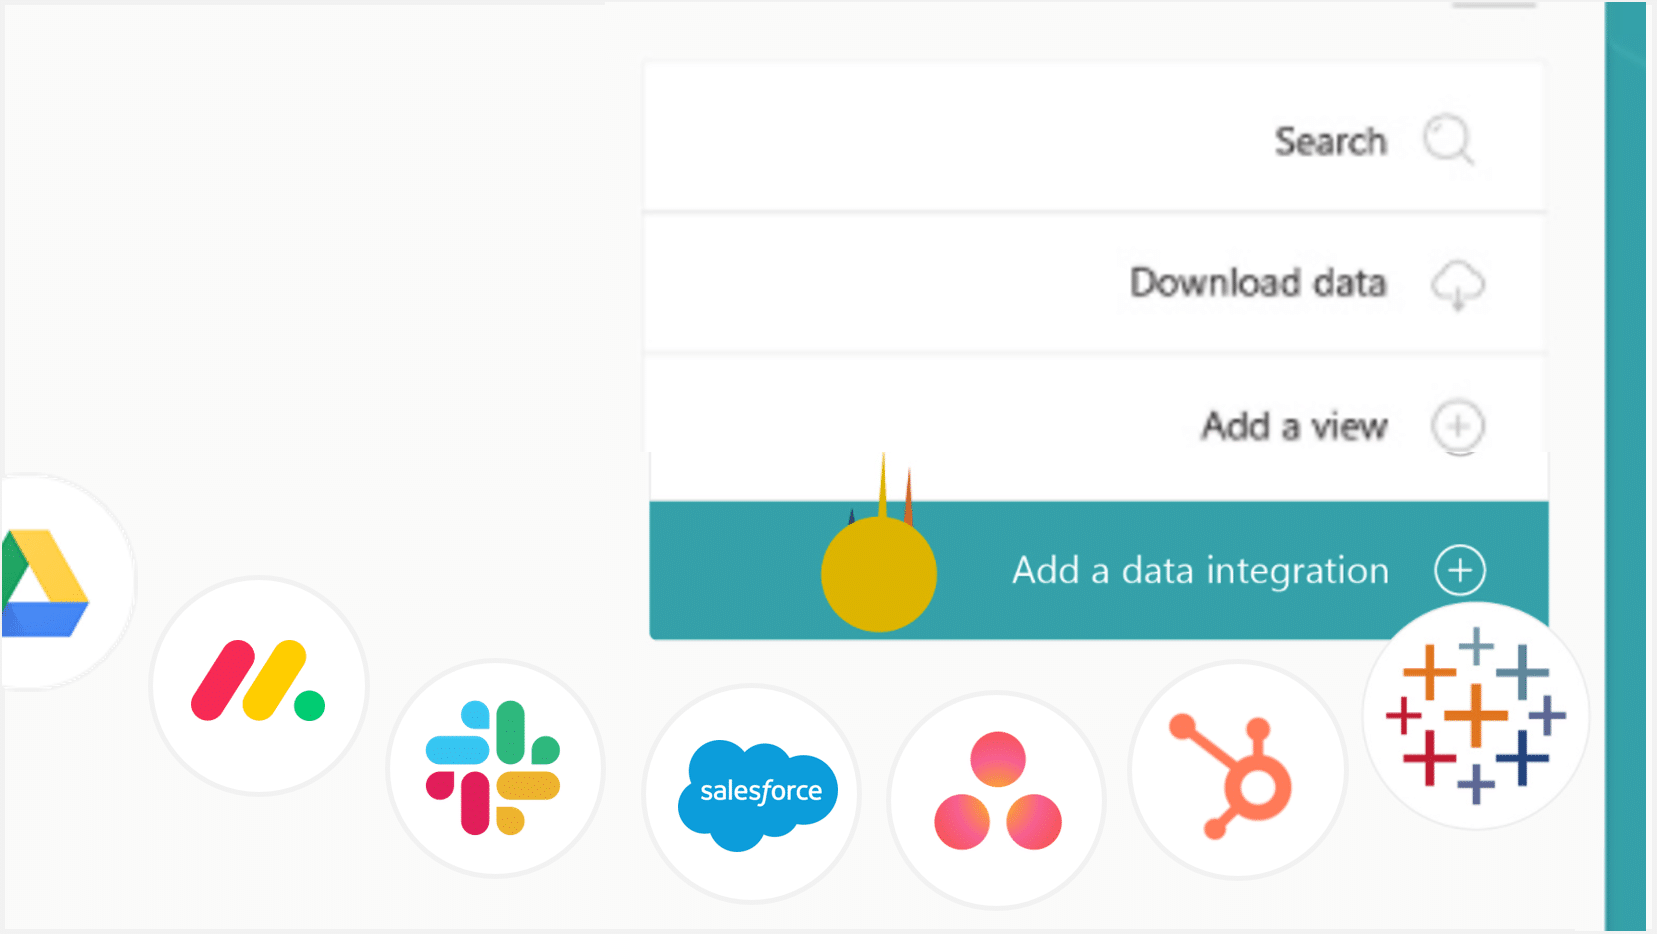 Data shared in existing workflows such as Slack Teams and Salesforce